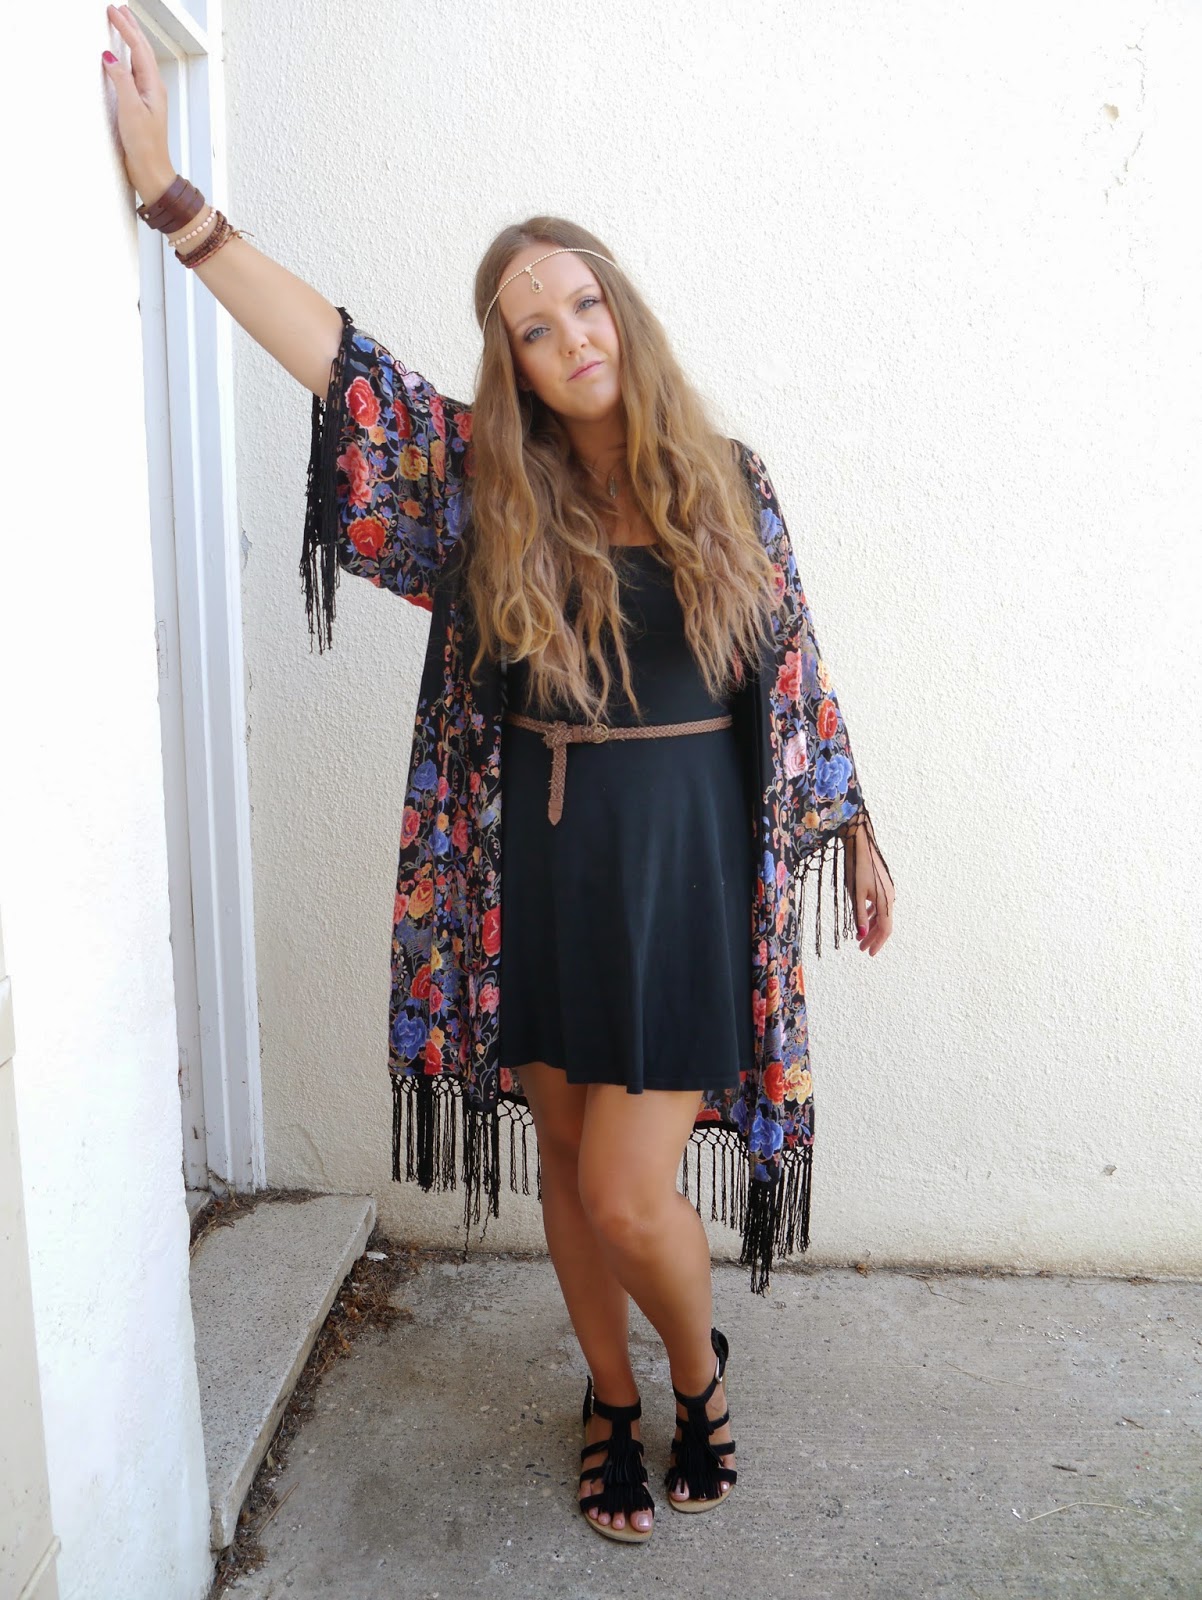 A photo of primark kaftan, topshop dress, sandals and jewellery